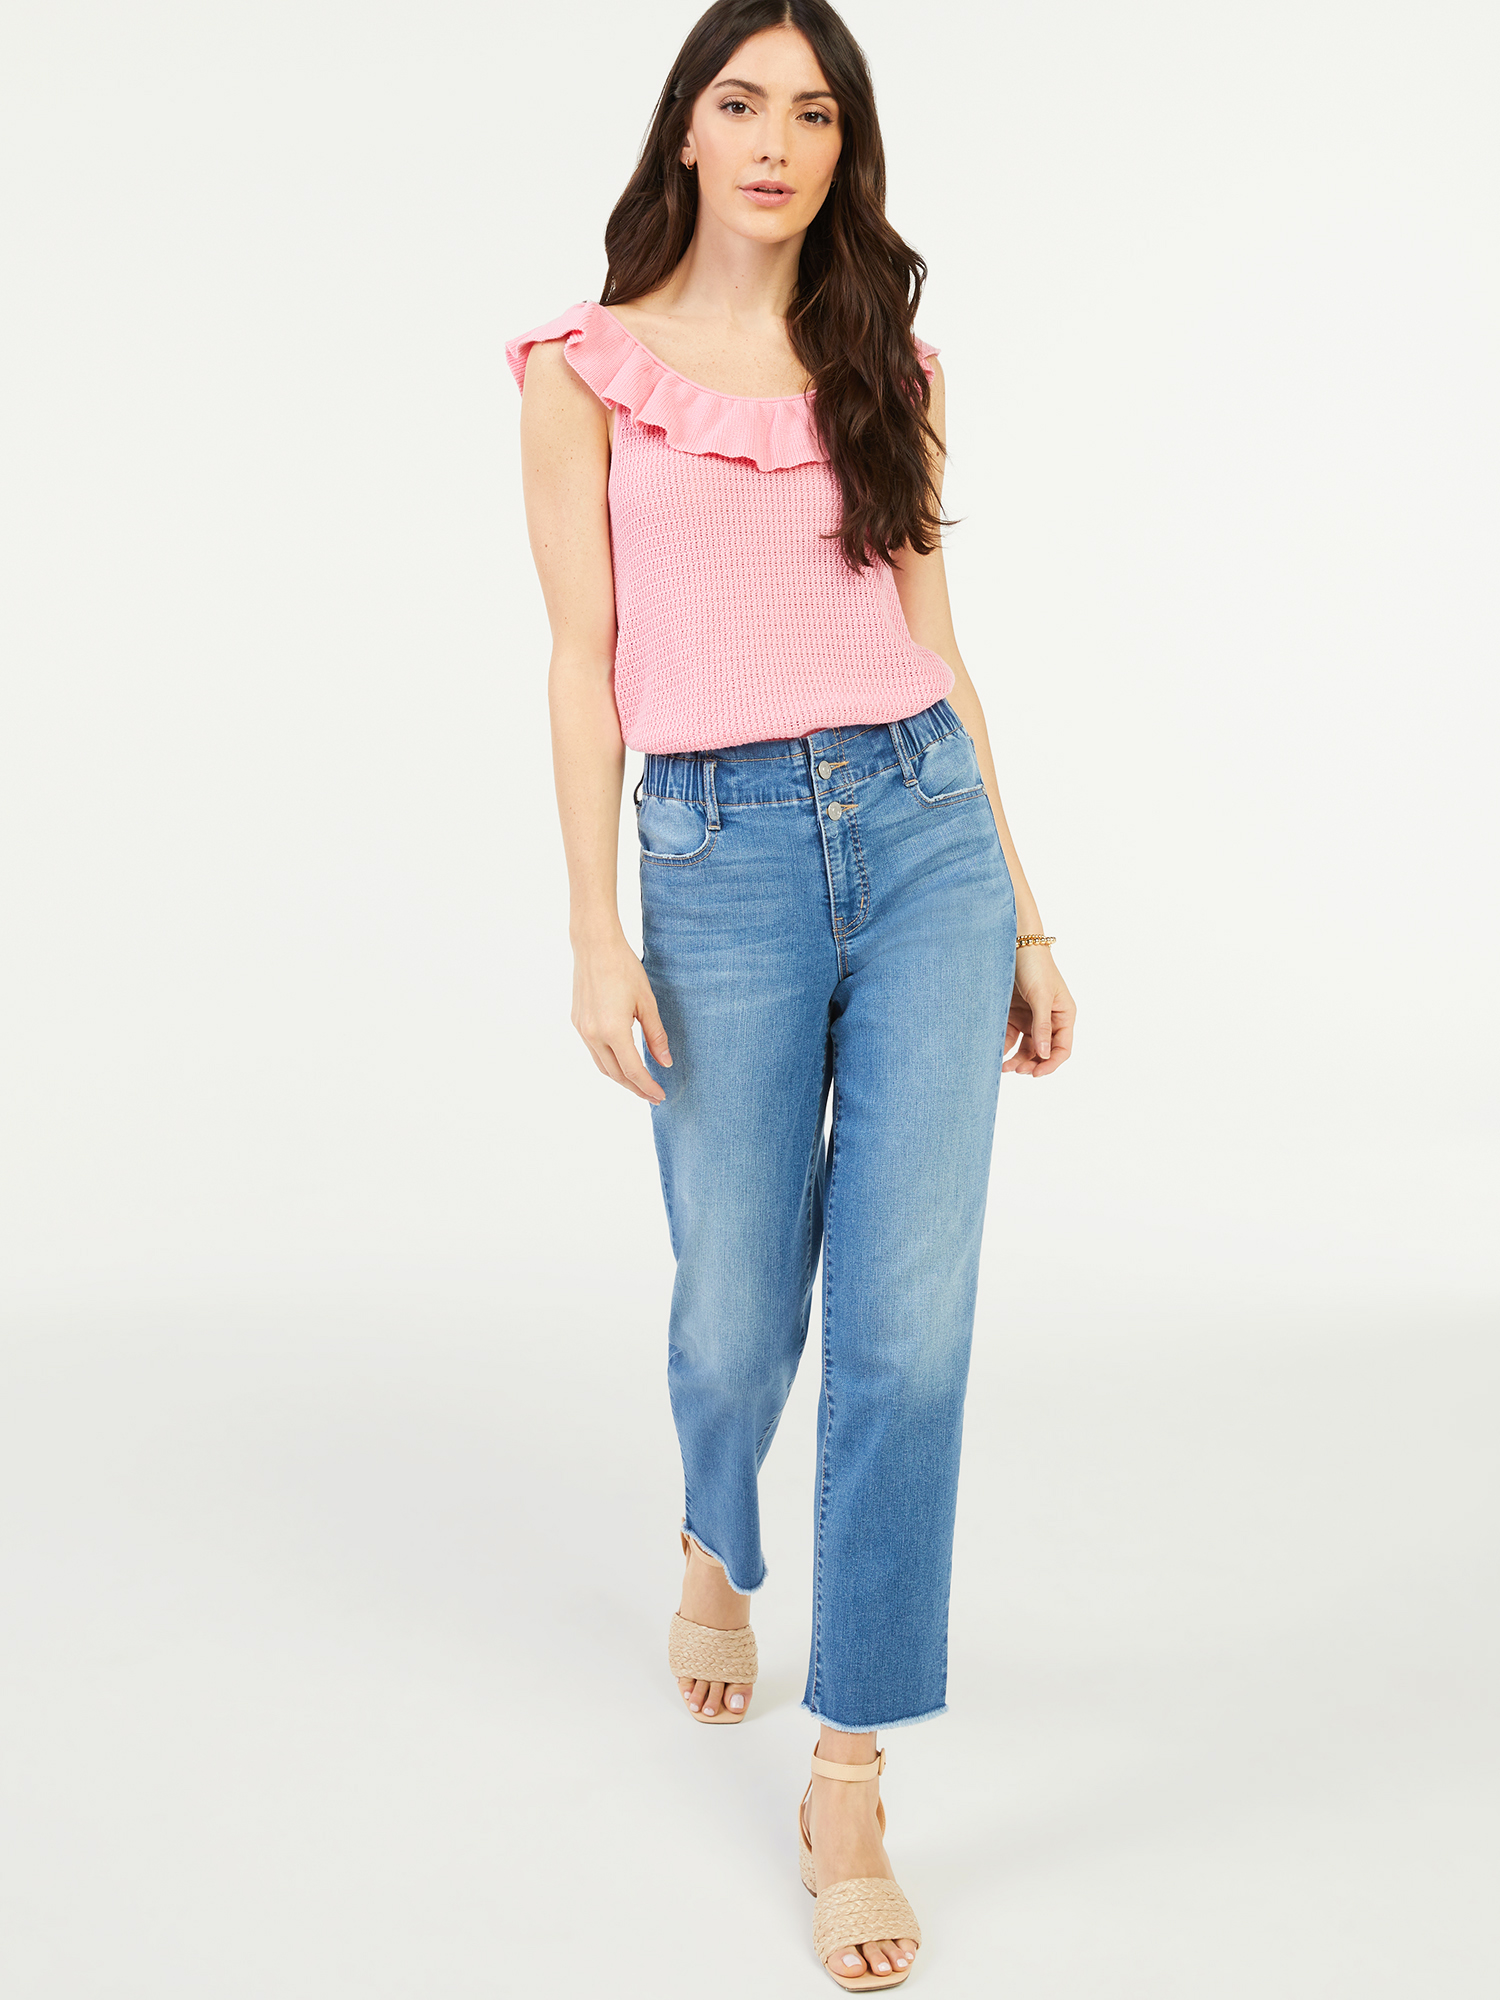 Scoop Women's High-Rise Straight Crop Jeans - image 2 of 6